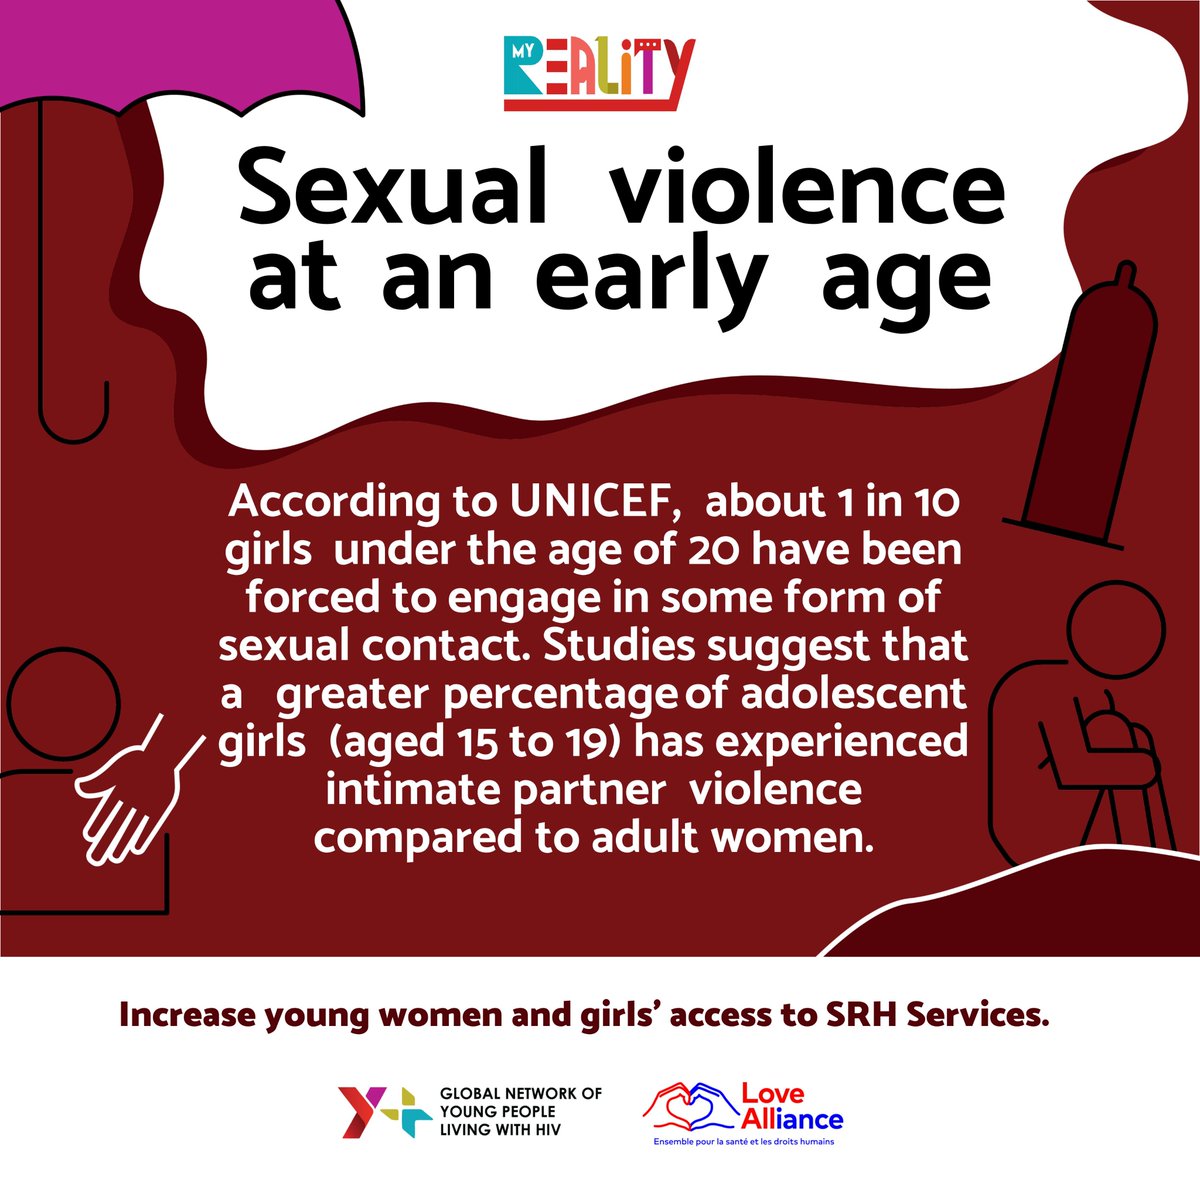 Shockingly, according to UNICEF, 120 million girls worldwide have endured forced sexual contact before turning 20. Studies have shown higher rates of intimate partner violence among adolescent girls aged 15 to 19 than adult women. These stats demand action. That’s why the My